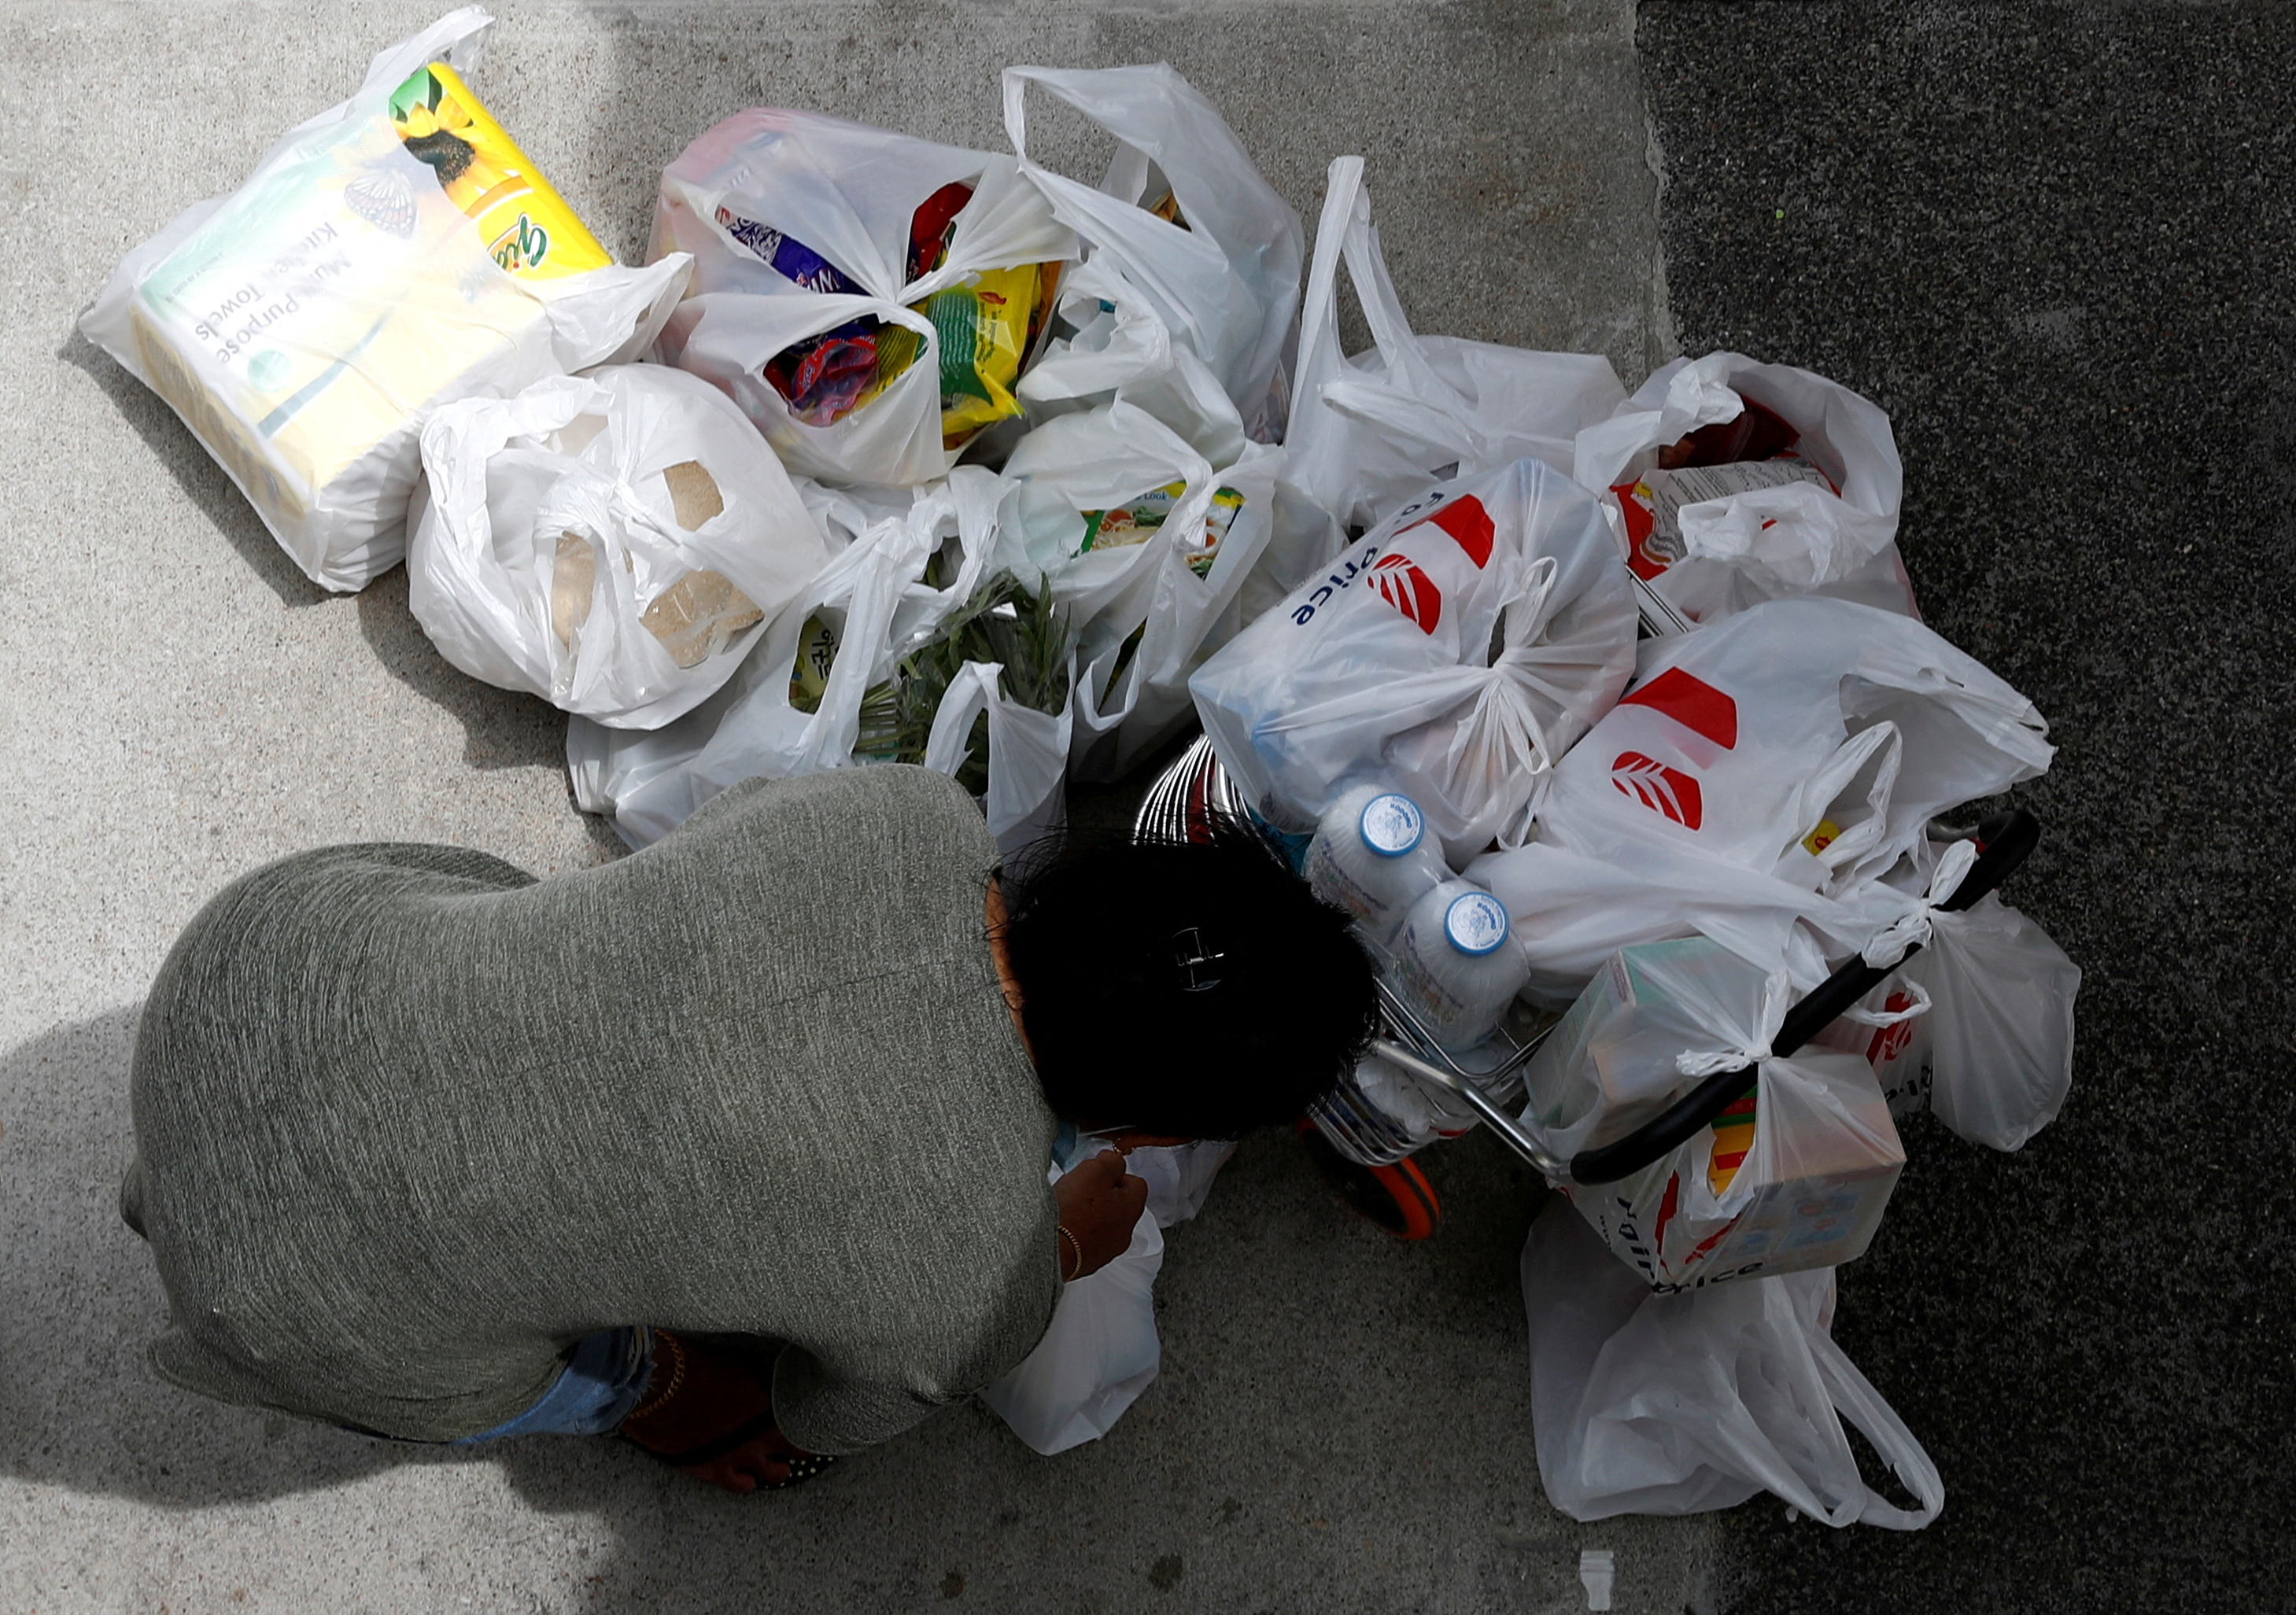 Singapore seeks to slash waste with plastic bags charge